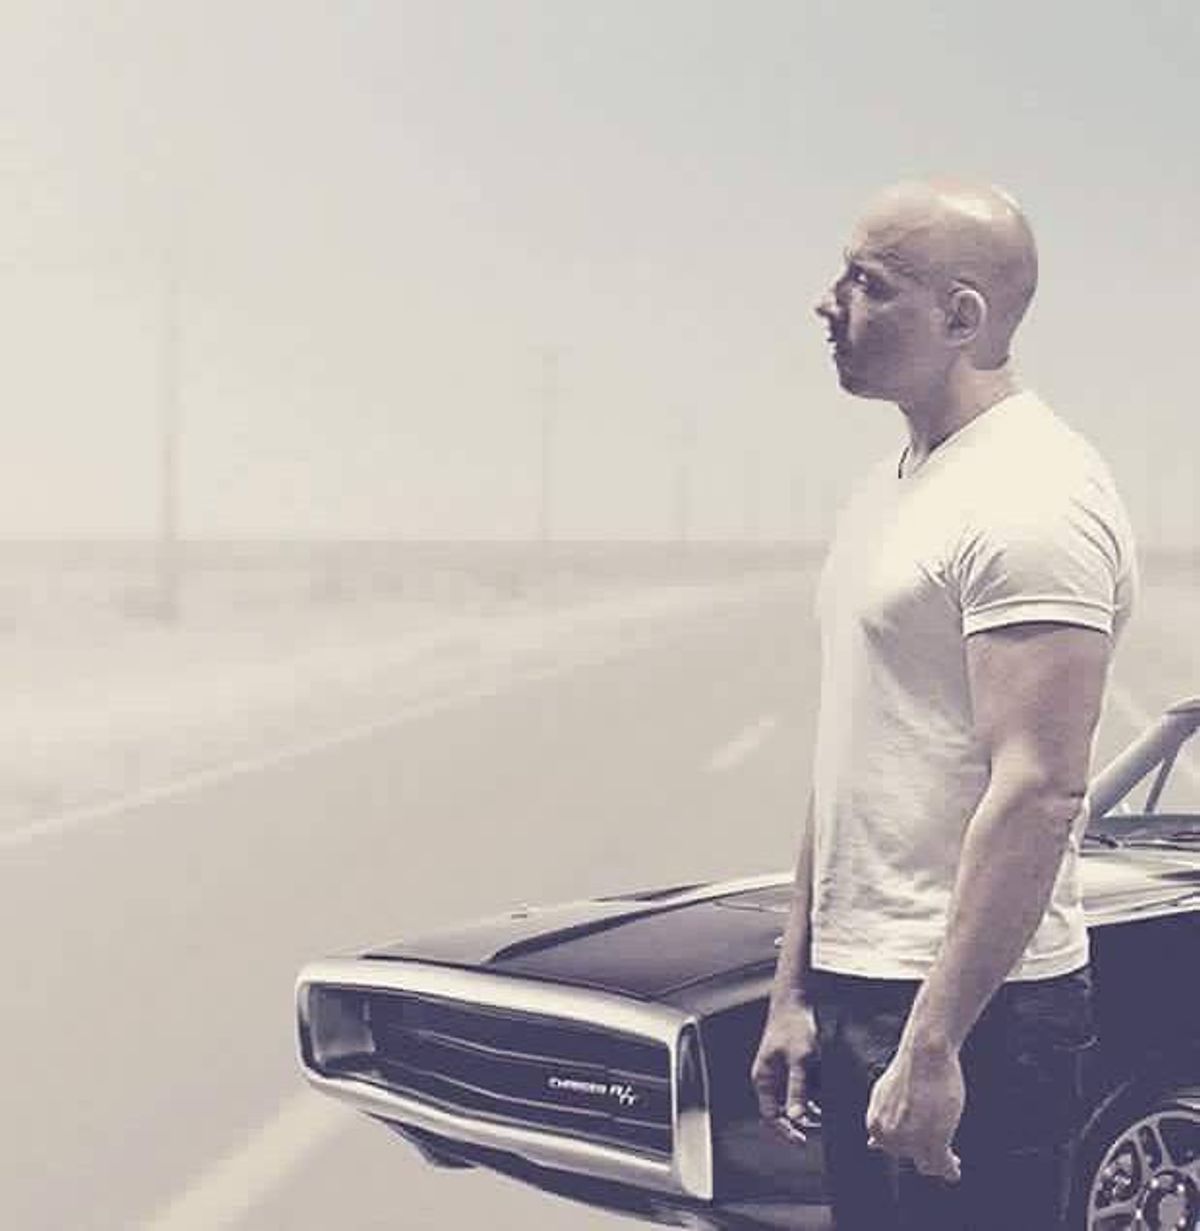 'Fast 8' Starts An Entirely New Chapter